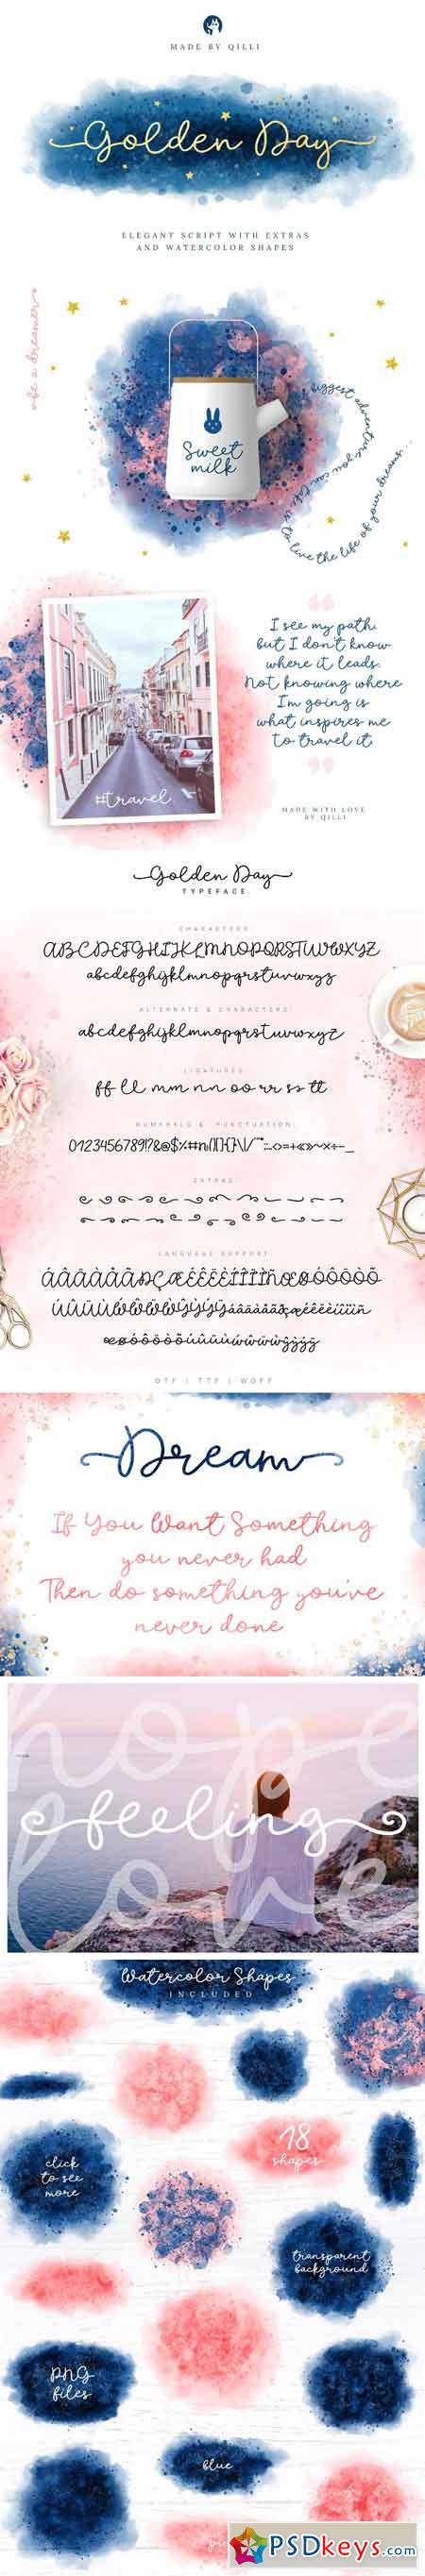 Golden Day Font with Extras & Shapes 2608179